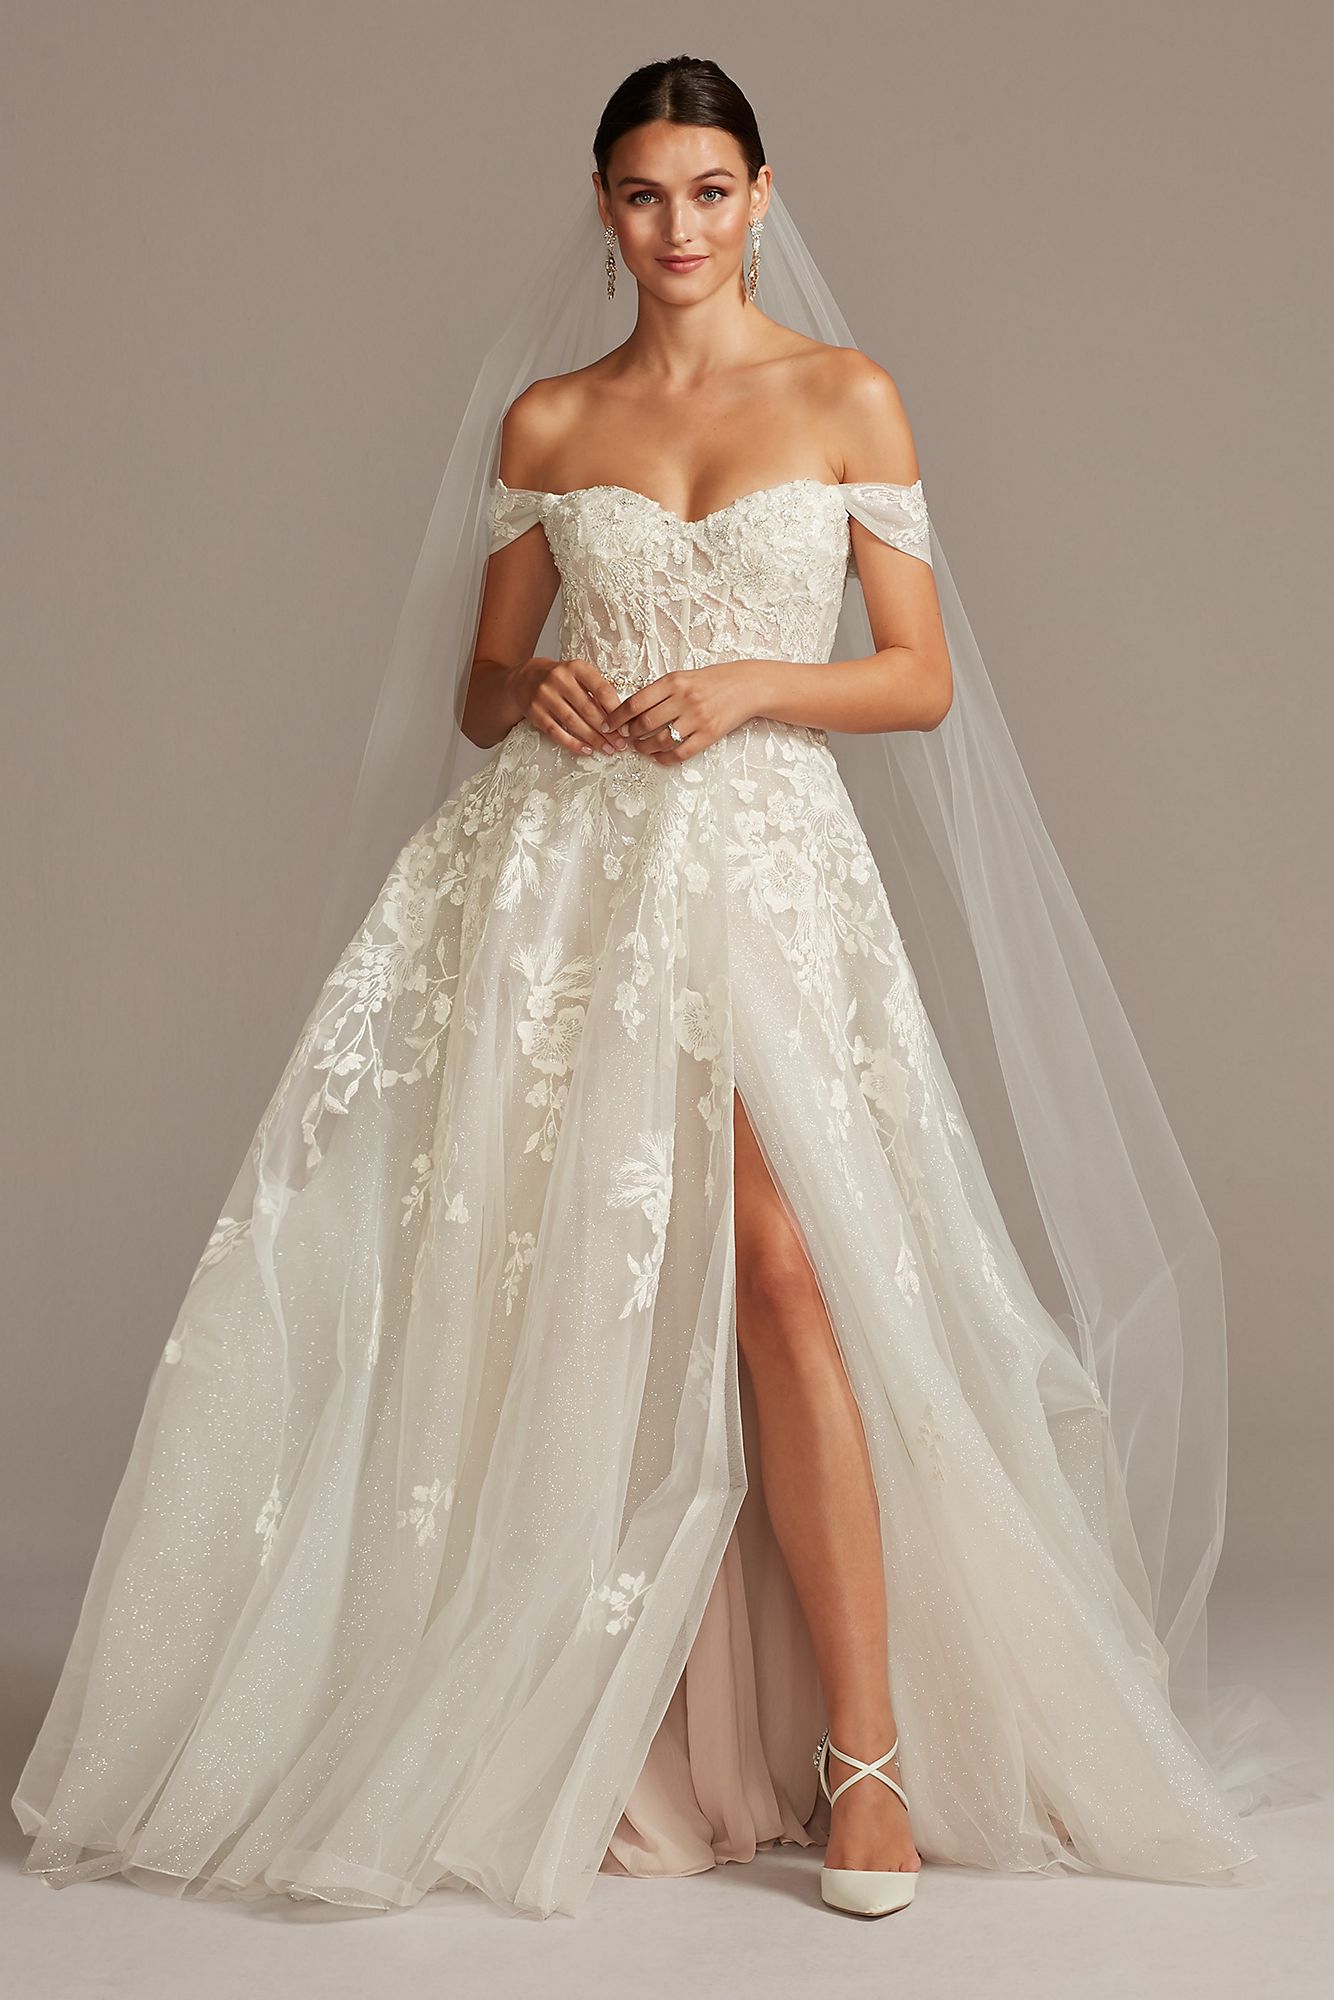 Floral Tulle Wedding Dress With Removable Sleeves Galina Signature Swg834 Swg834 37390 